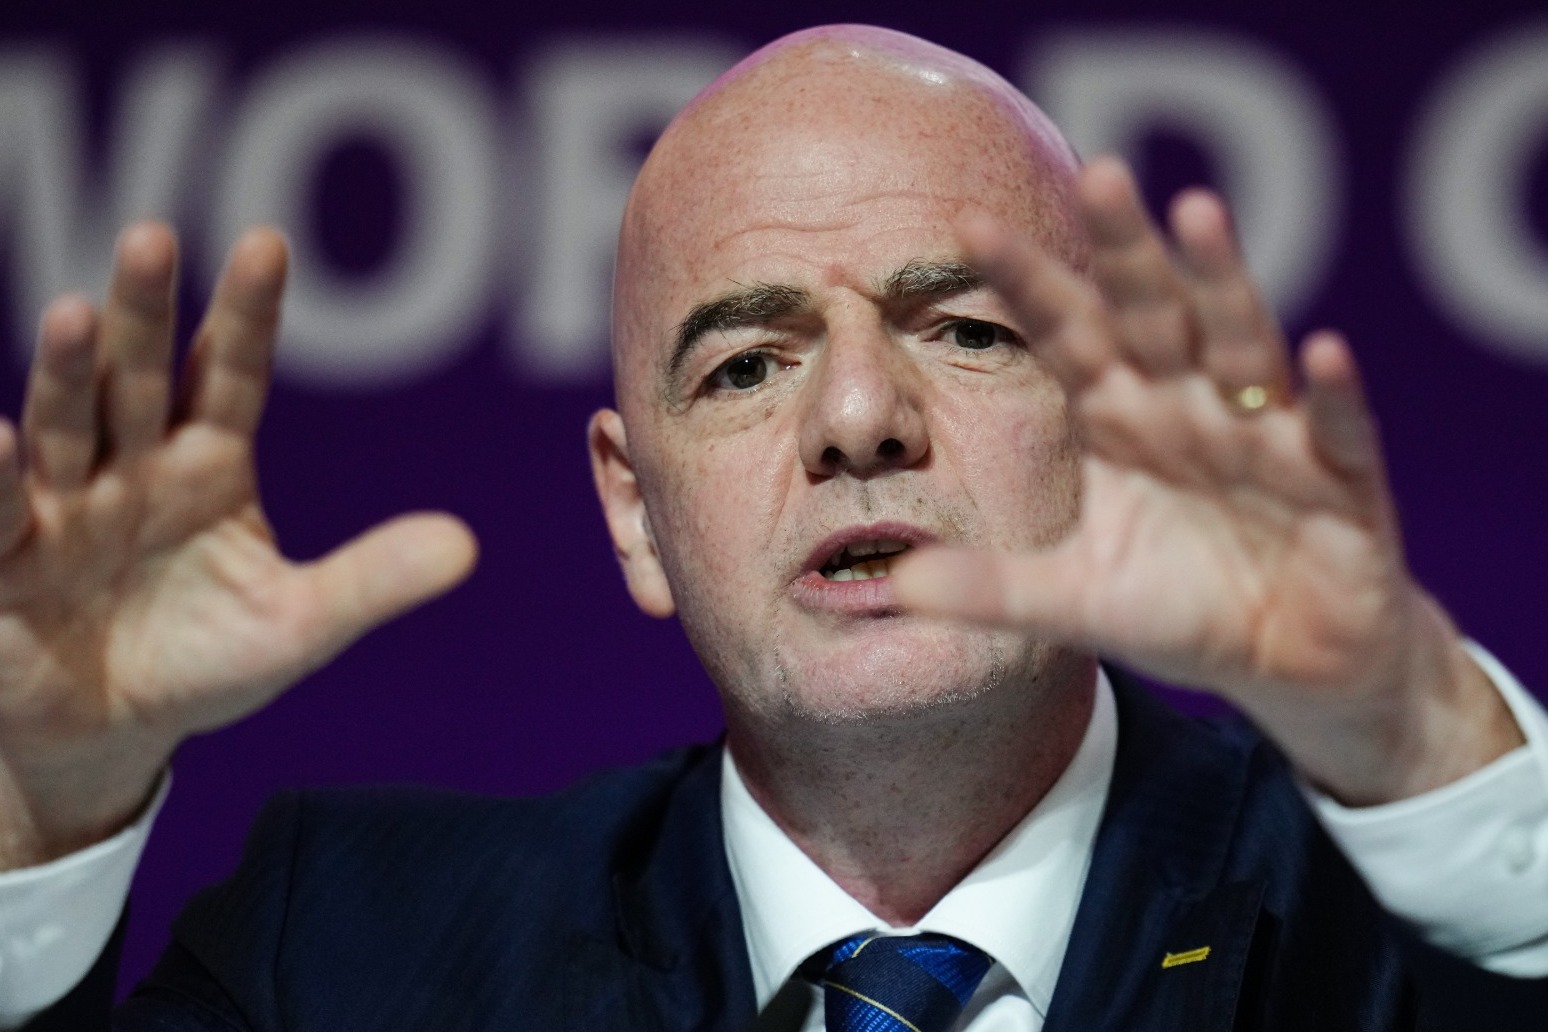 Gianni Infantino: Europeans should look at themselves before criticising Qatar 